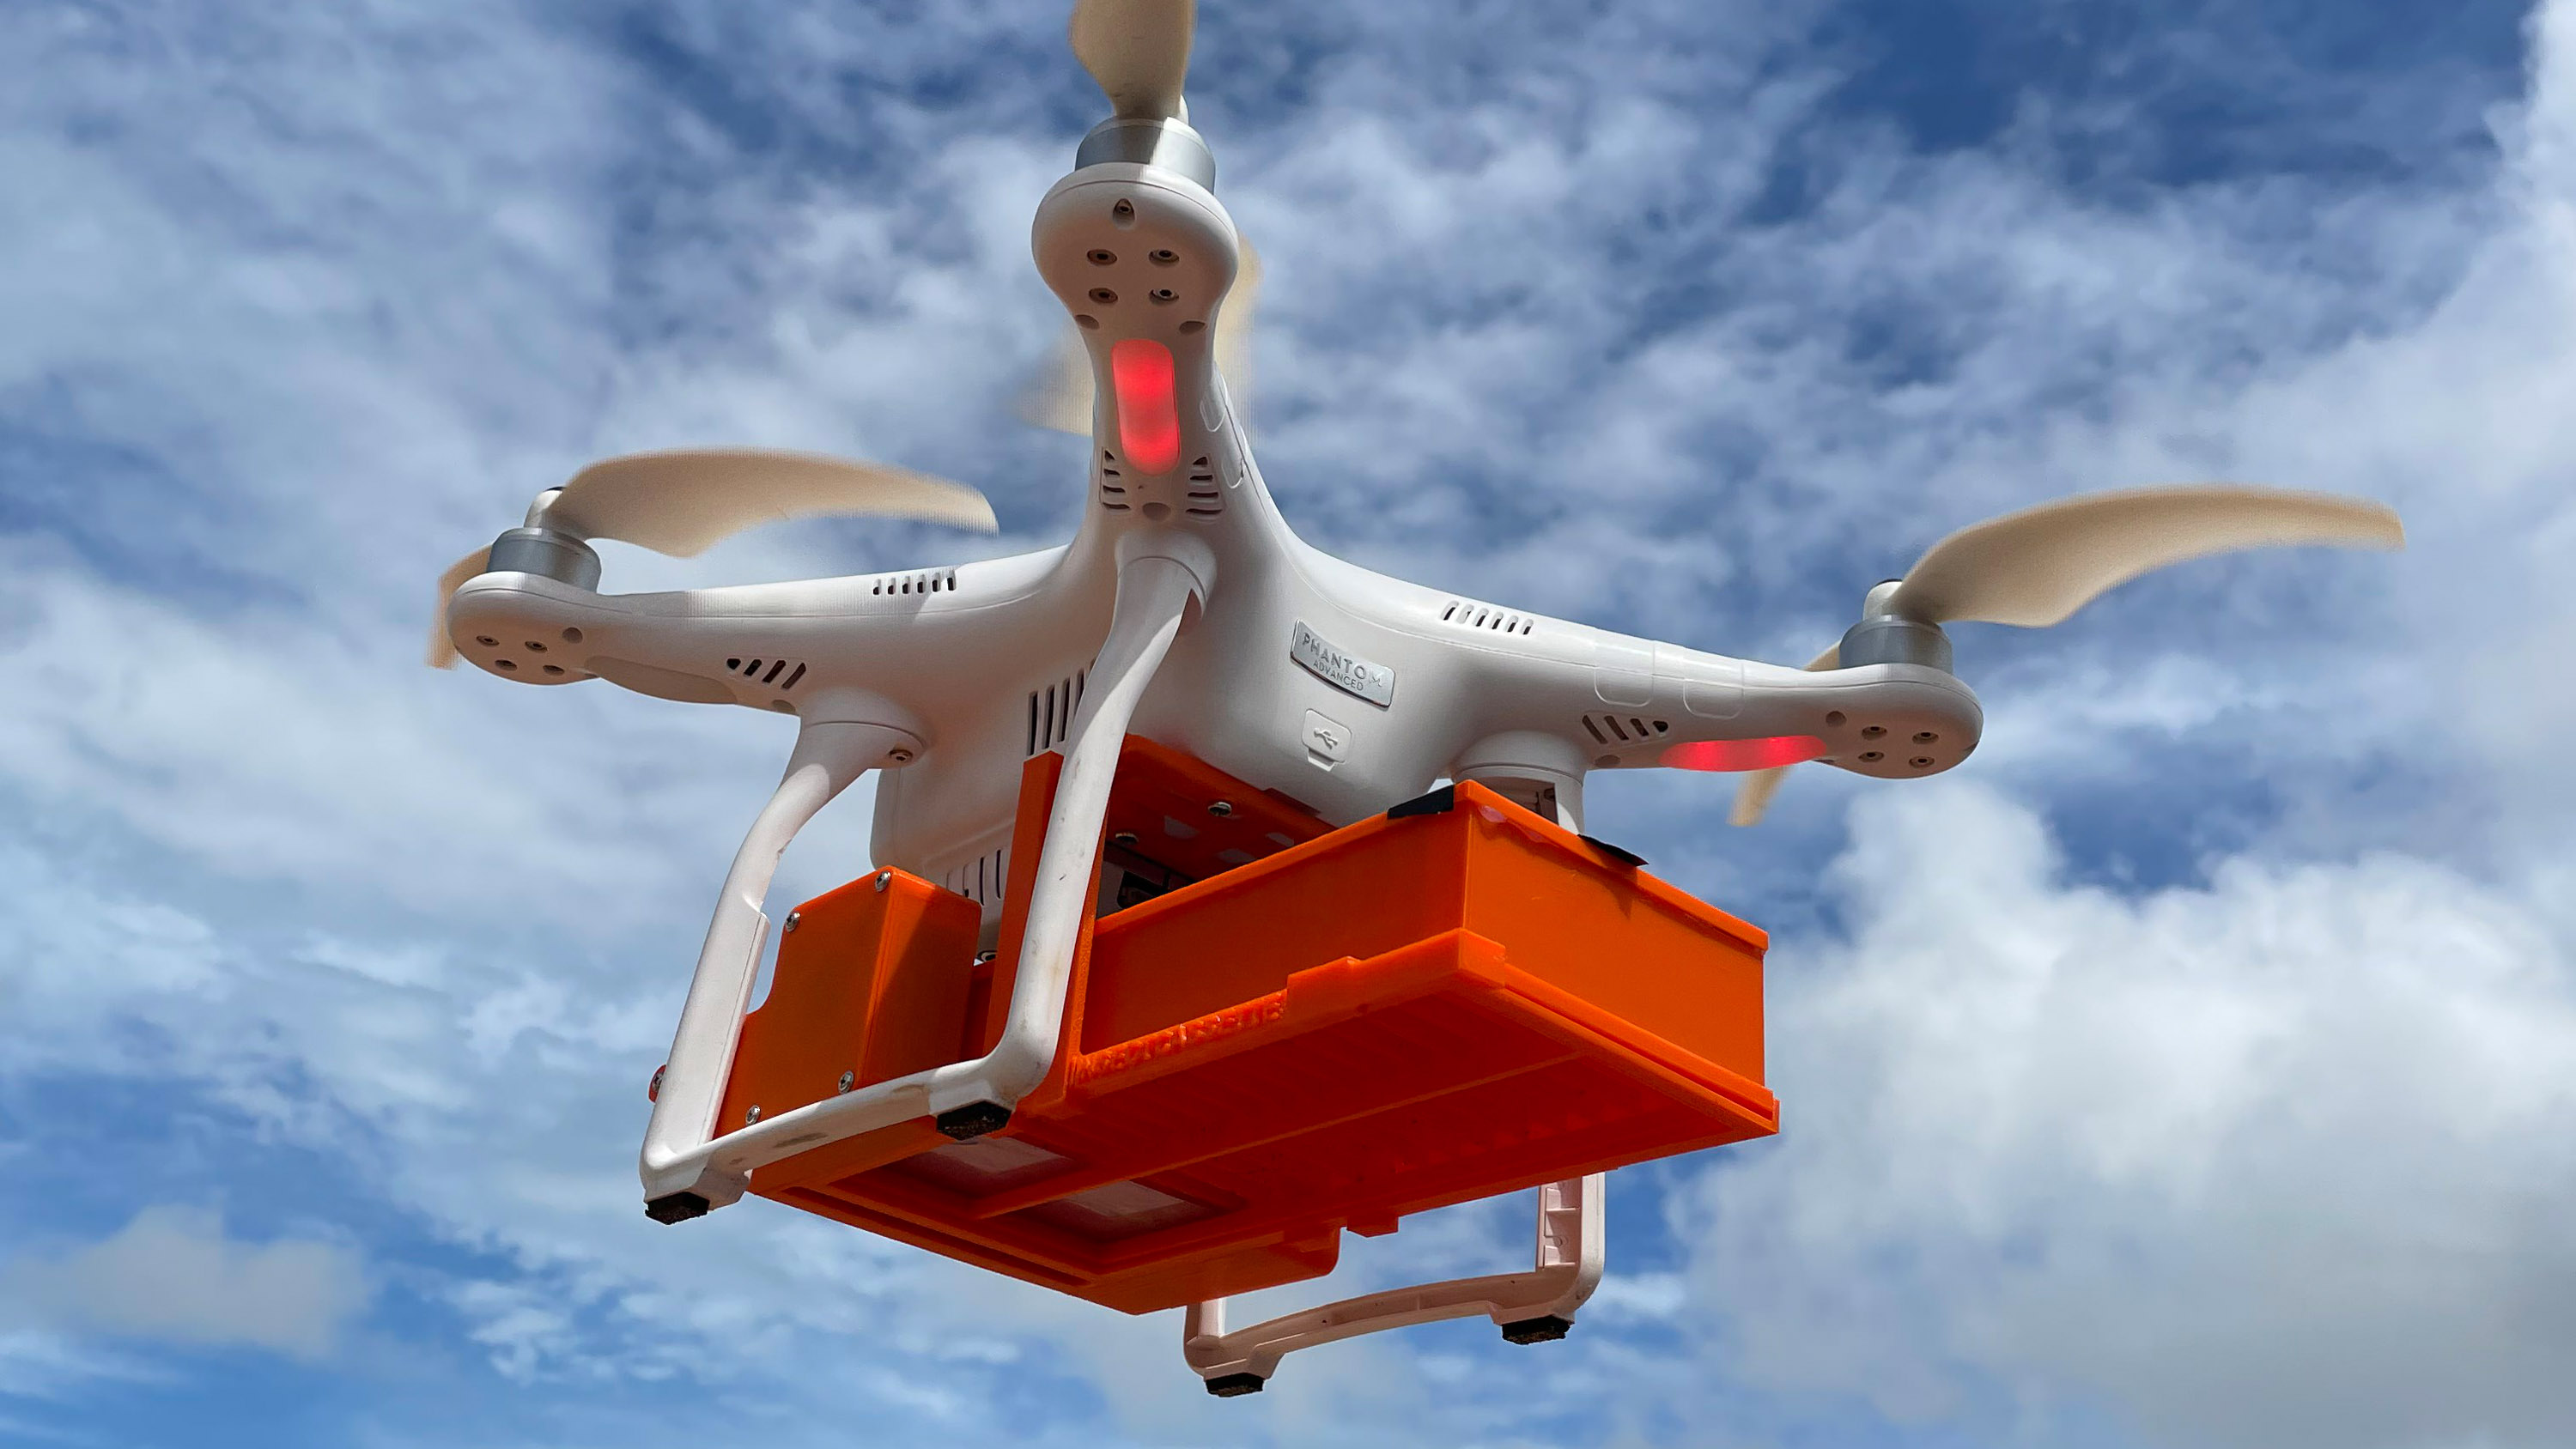 a birdview quadcopter drone carrying a bright orange cassette of insects